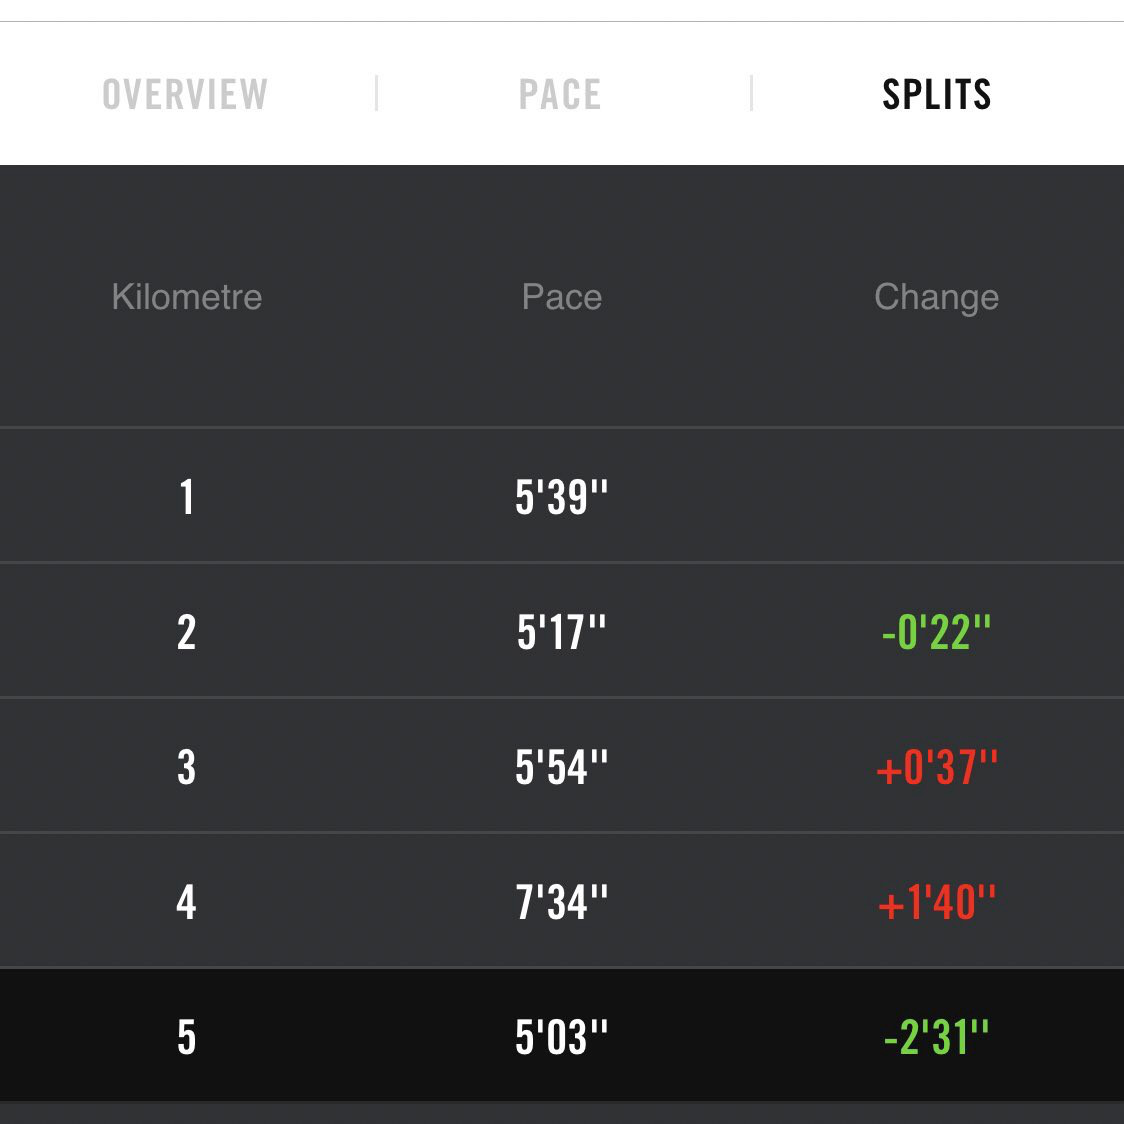 A grab of from the Nike Running Club, showing my split times for the 5 kilometres I ran on Wednesday. There are lots of kilometres that are between 5 and 6 minutes long, but there’s one stand out: 7 and a half minutes. Thinking hard can mean slow running. (Or is that pace actually jogging?)
